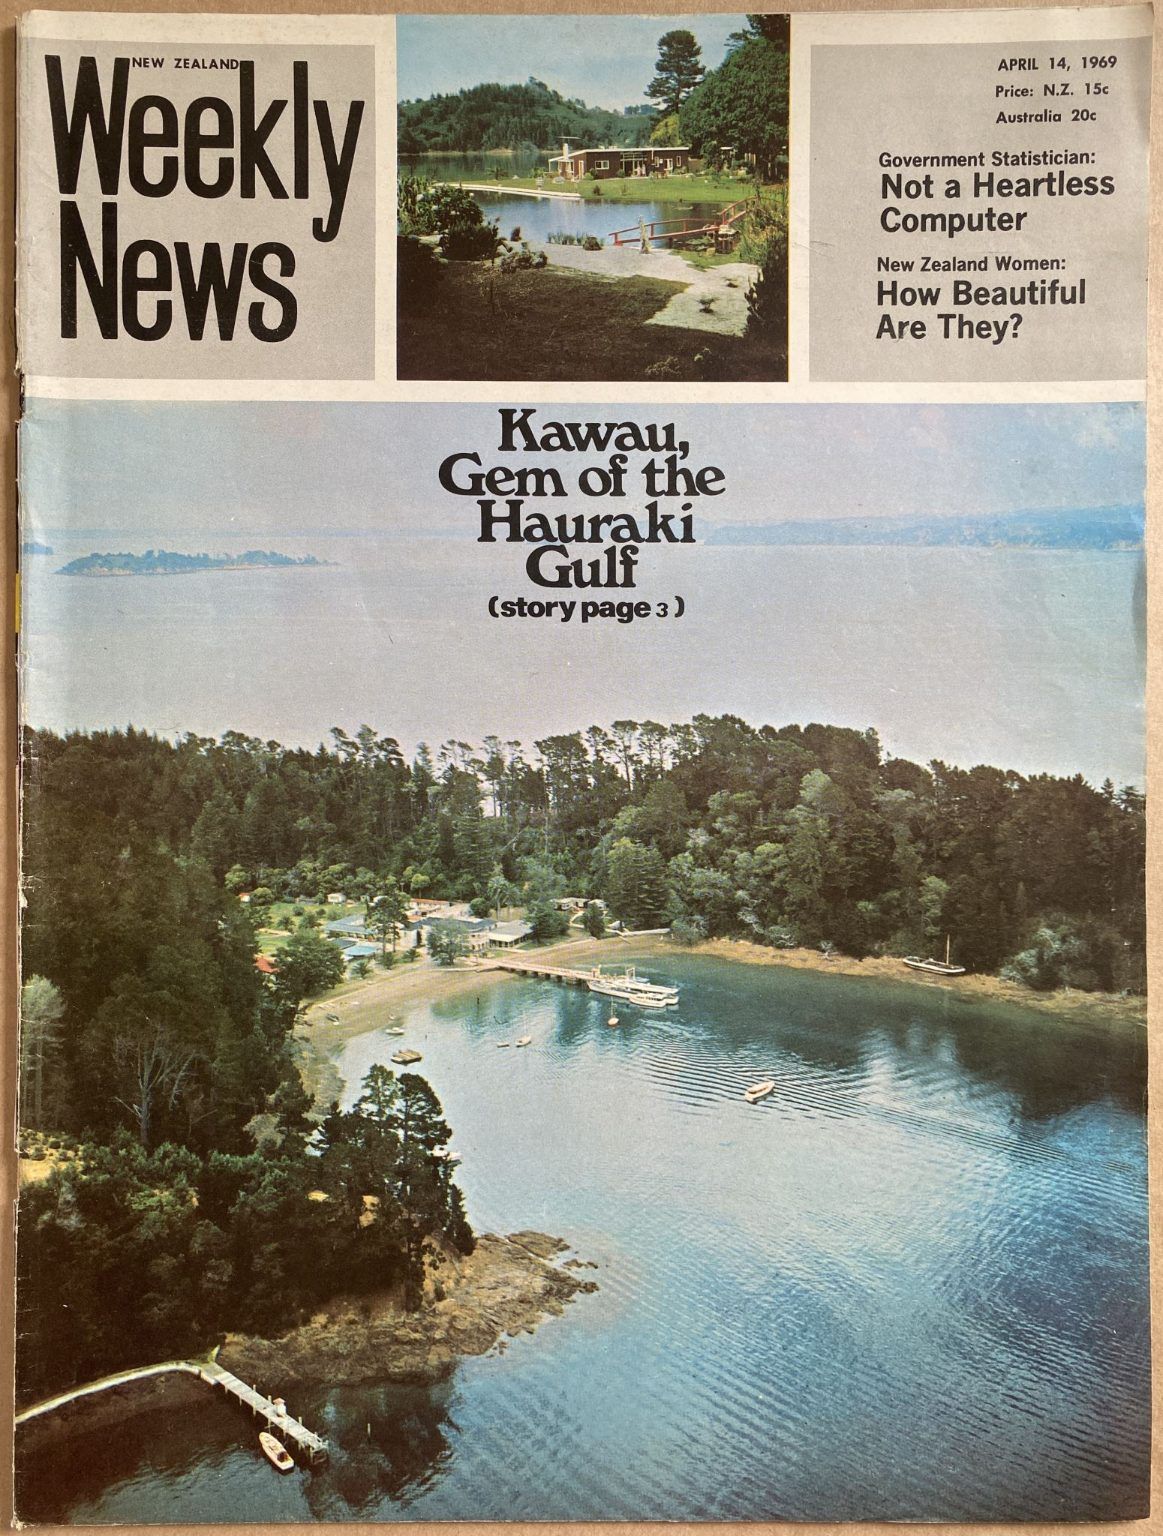 OLD NEWSPAPER: New Zealand Weekly News, No. 5498, 14 April 1969